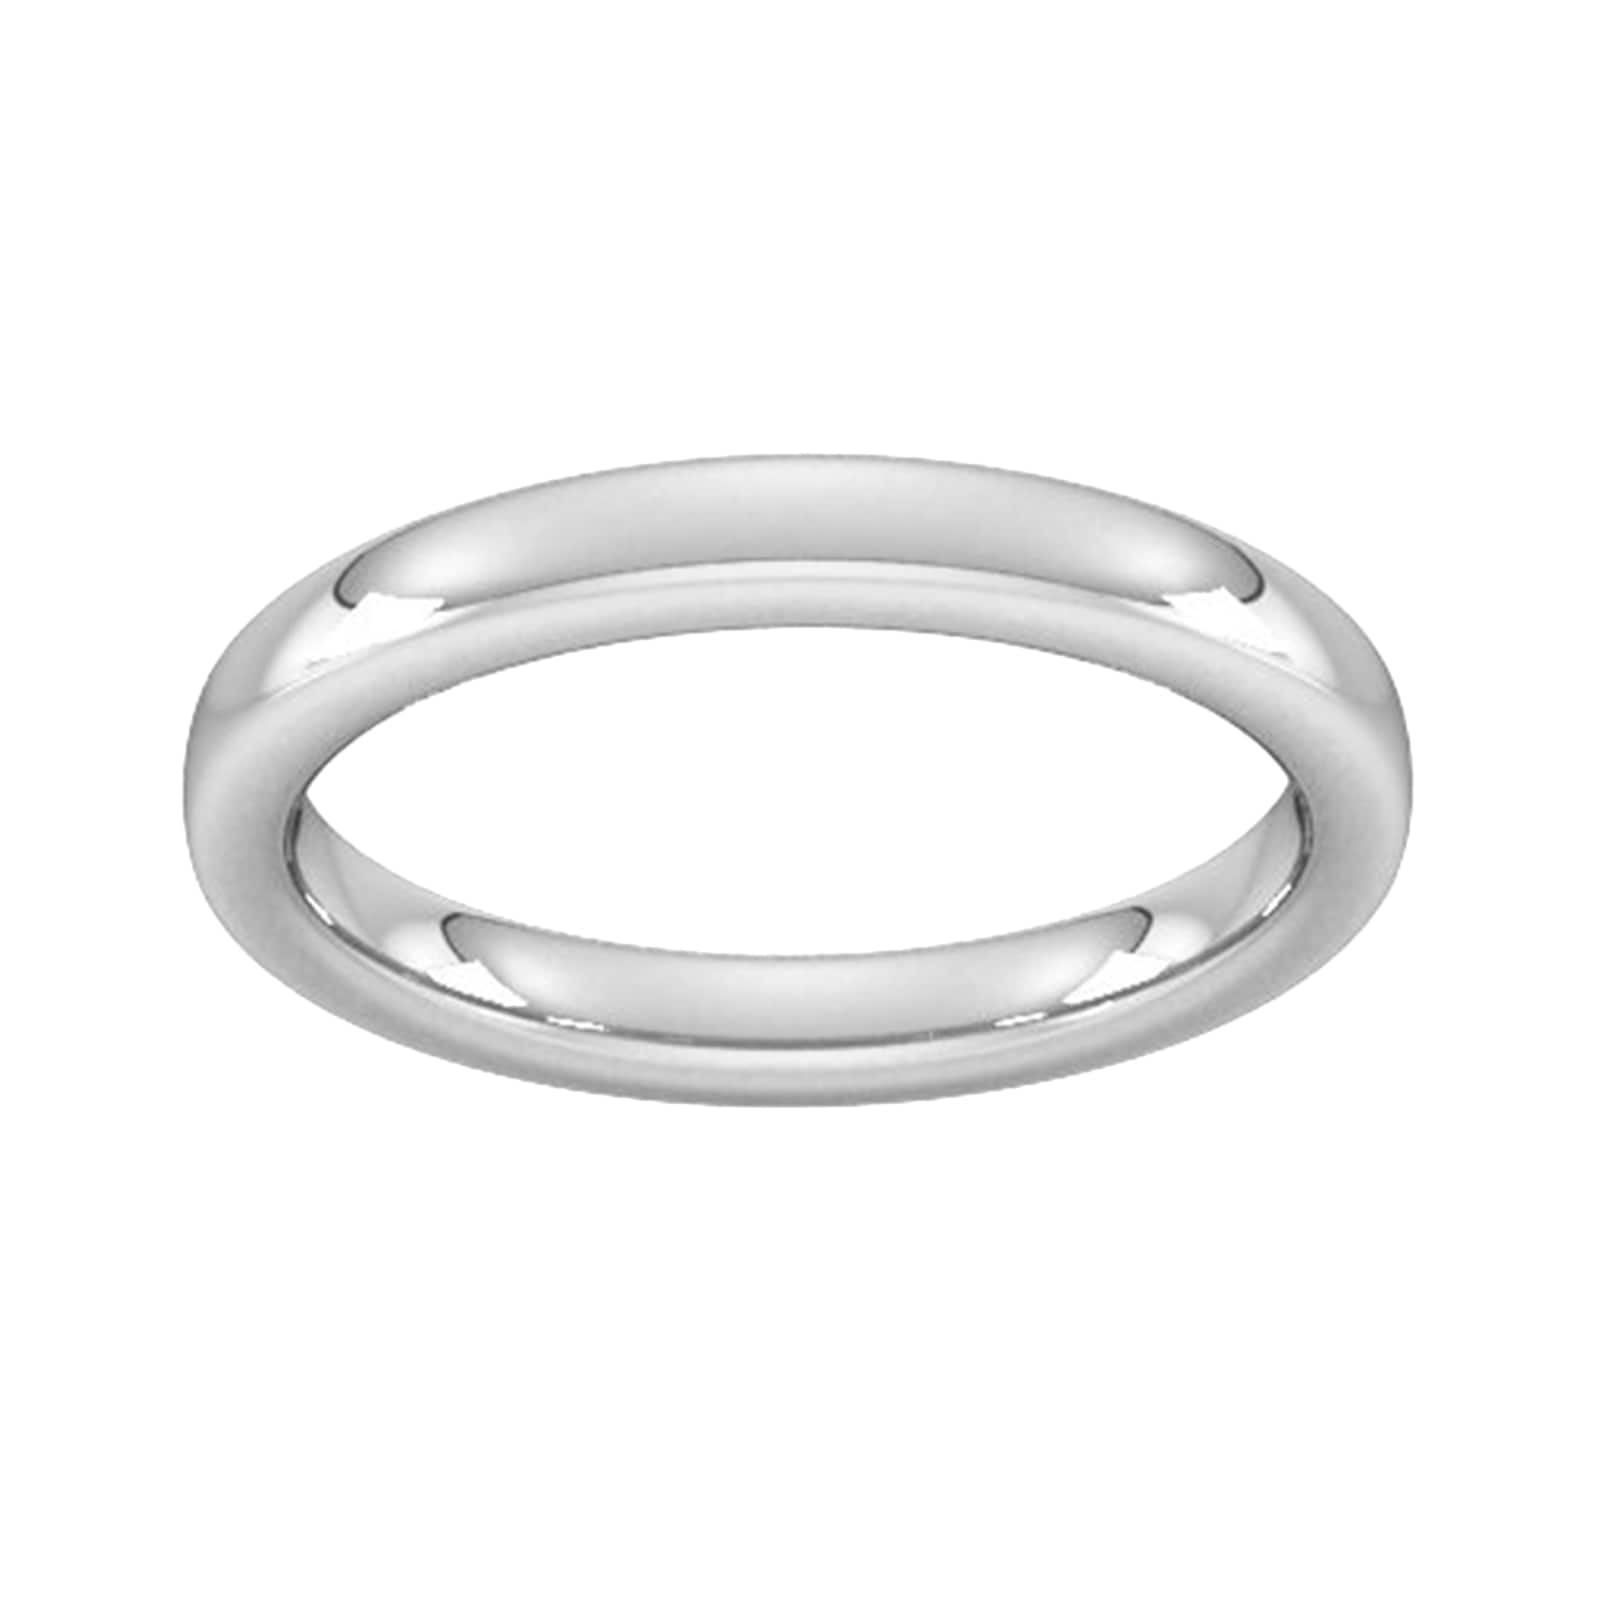 3mm Slight Court Extra Heavy Wedding Ring In 9 Carat White Gold - Ring Size M